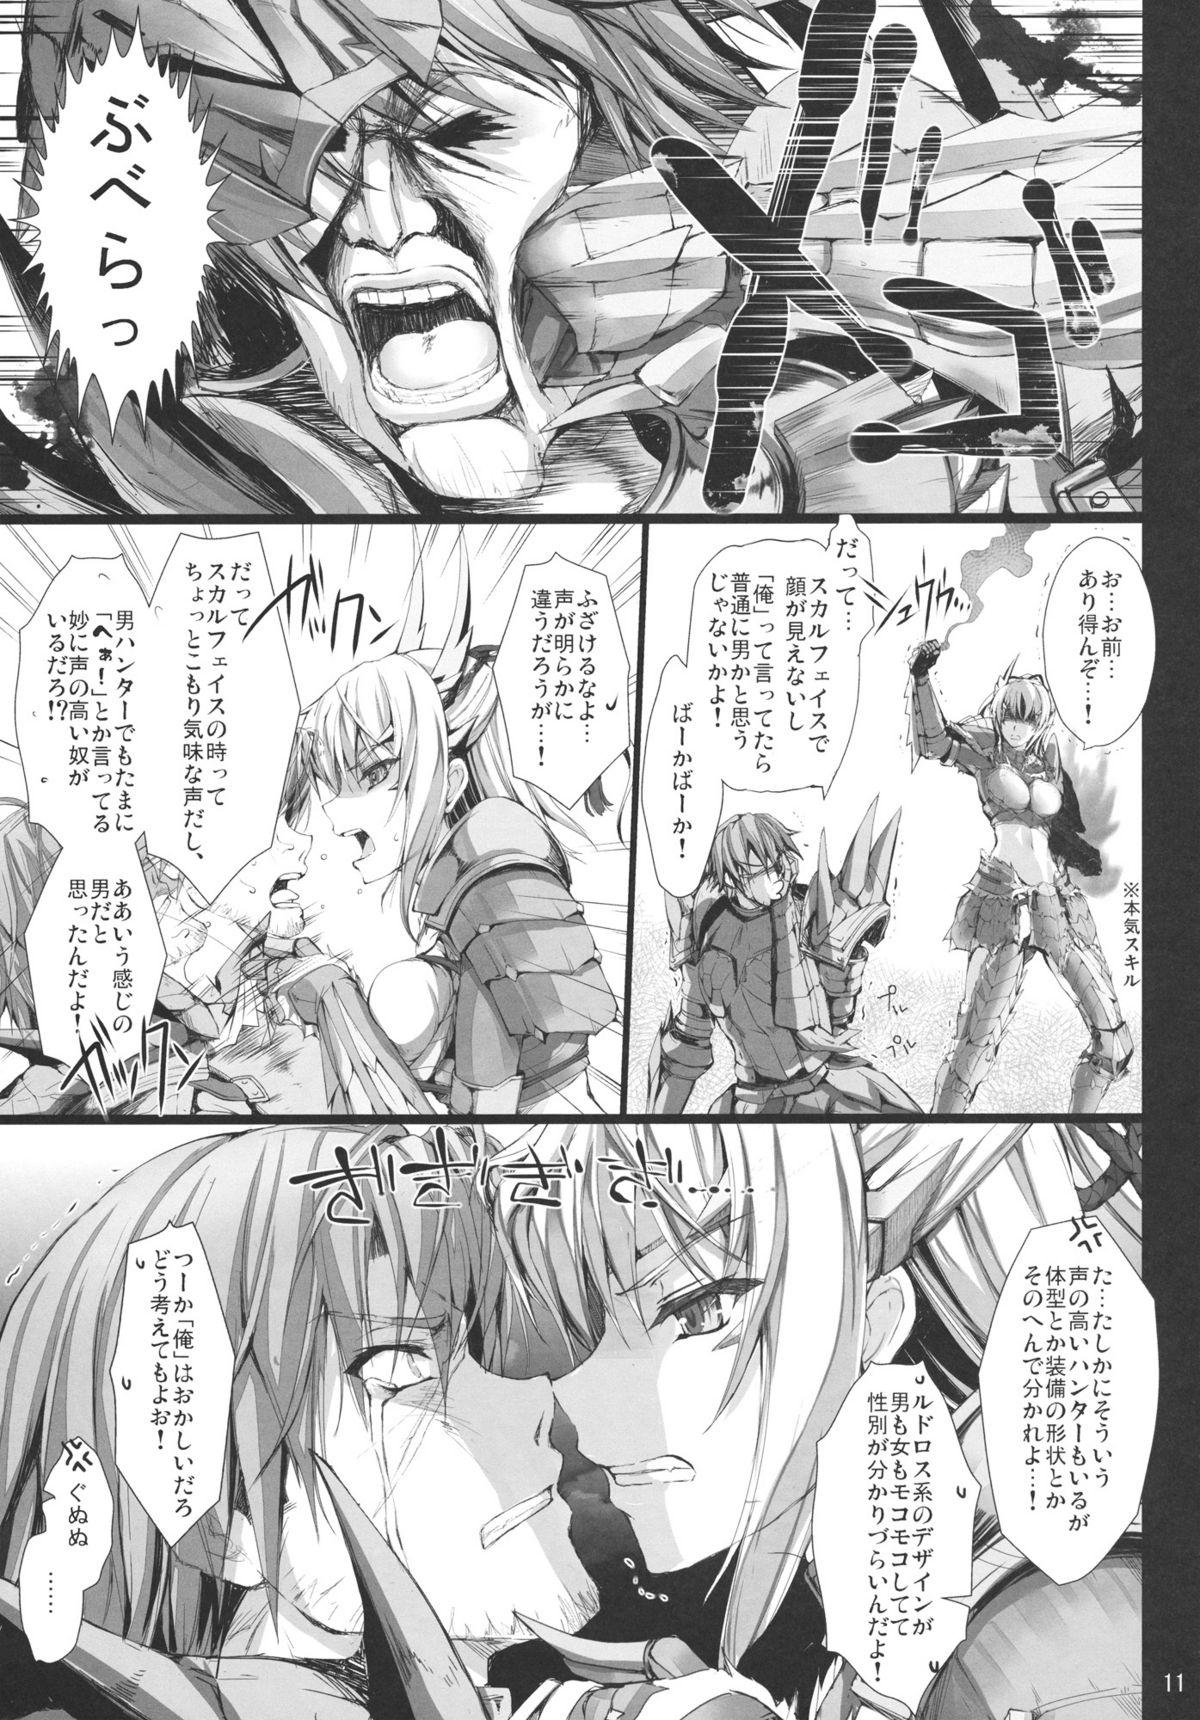 Hot Blow Jobs Monhan no Erohon 11 - Monster hunter Leaked - Page 10